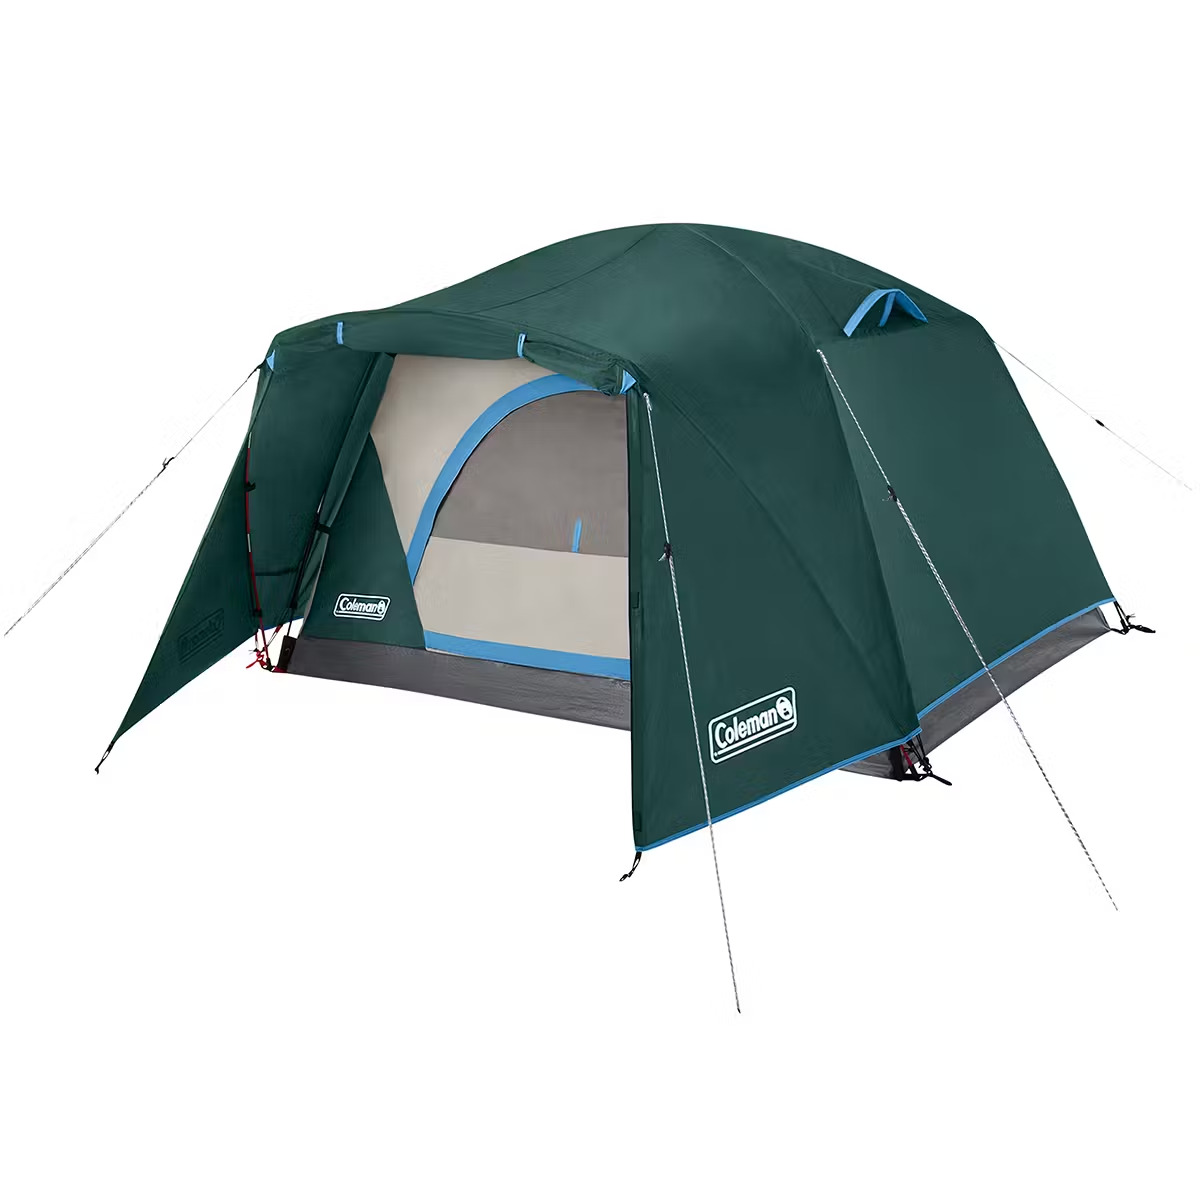 Coleman Skydome 2-Person Camping Tent with Full-Fly Vestibule in Evergreen NIB